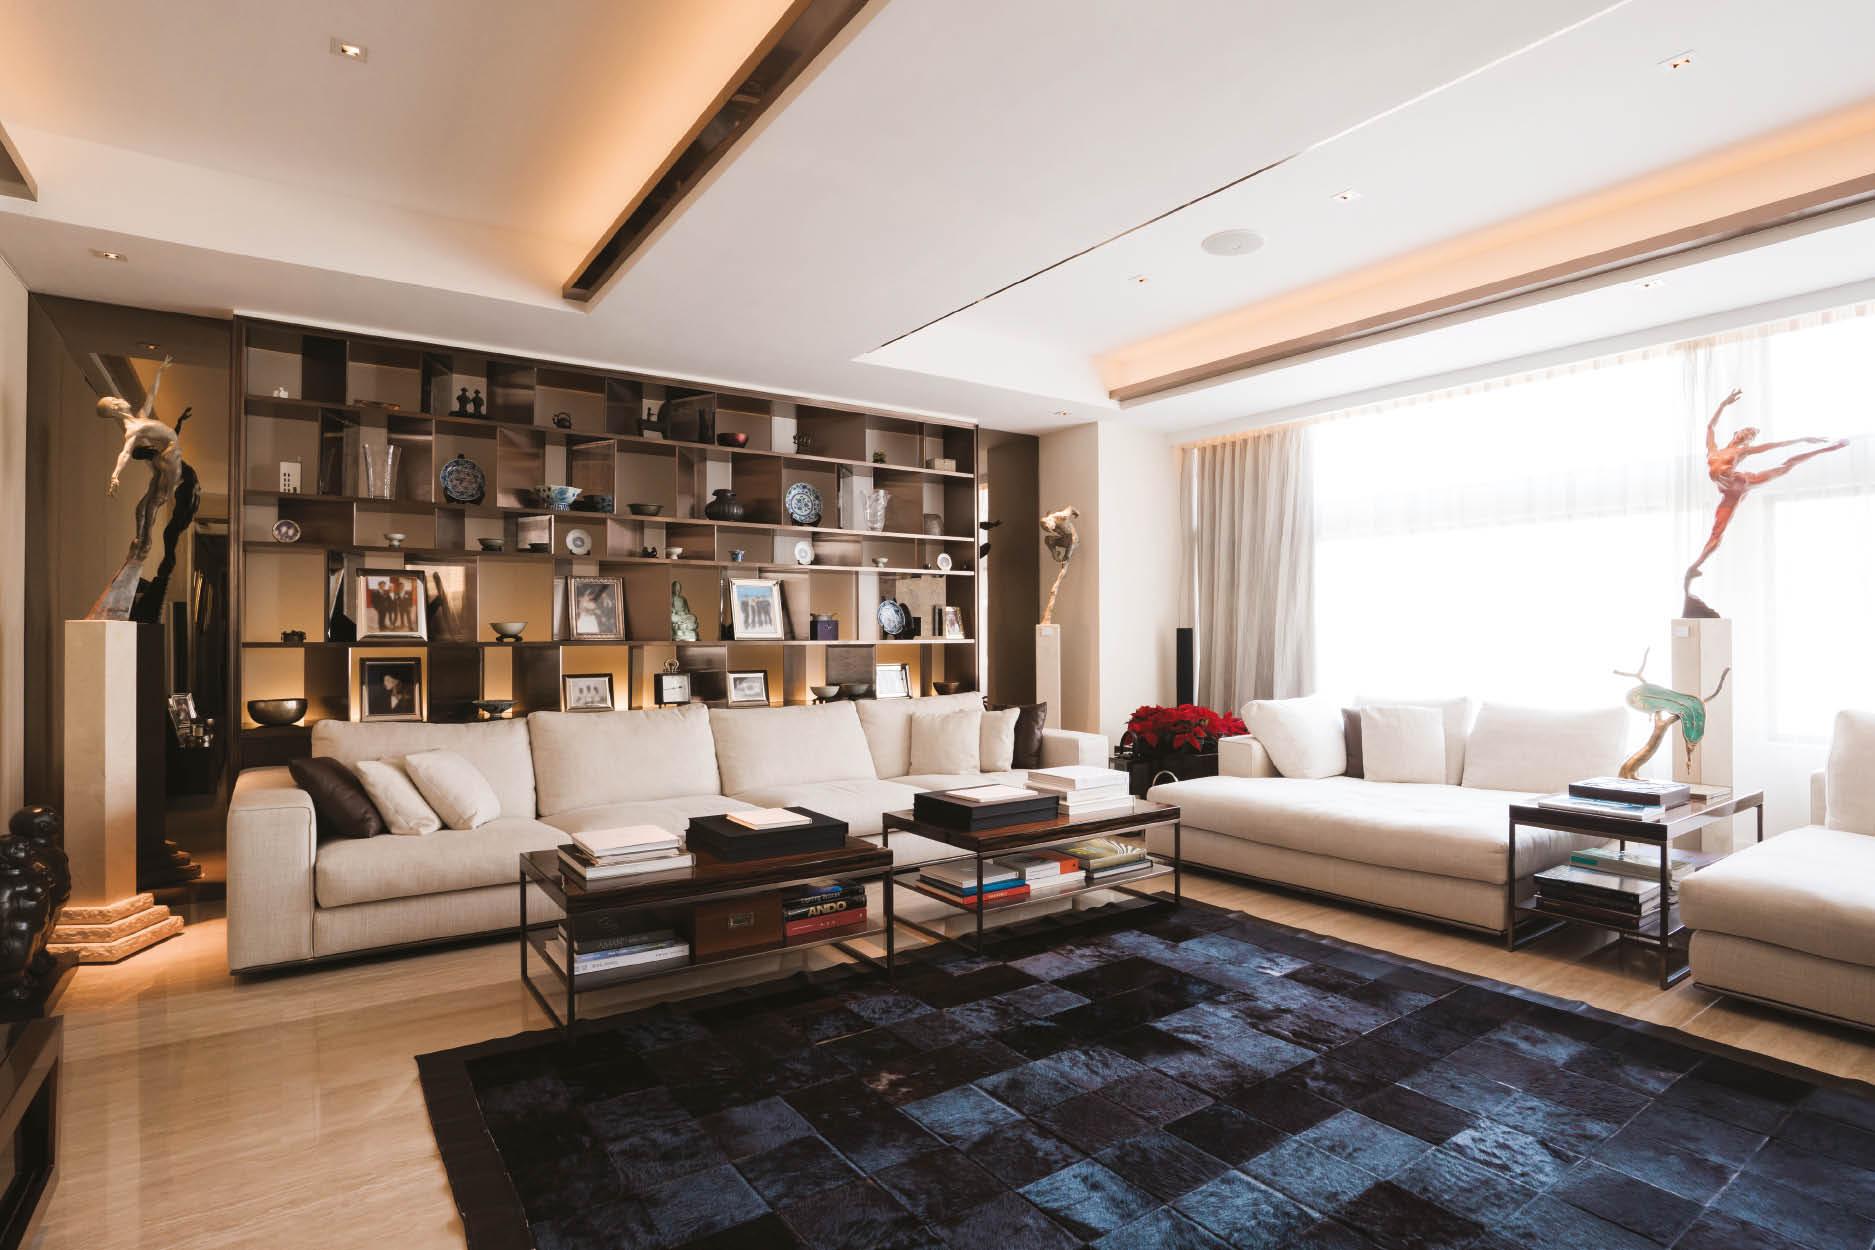 Lighting Designer Tino Kwan’s Exquisite Home Shines with Charm and Elegance